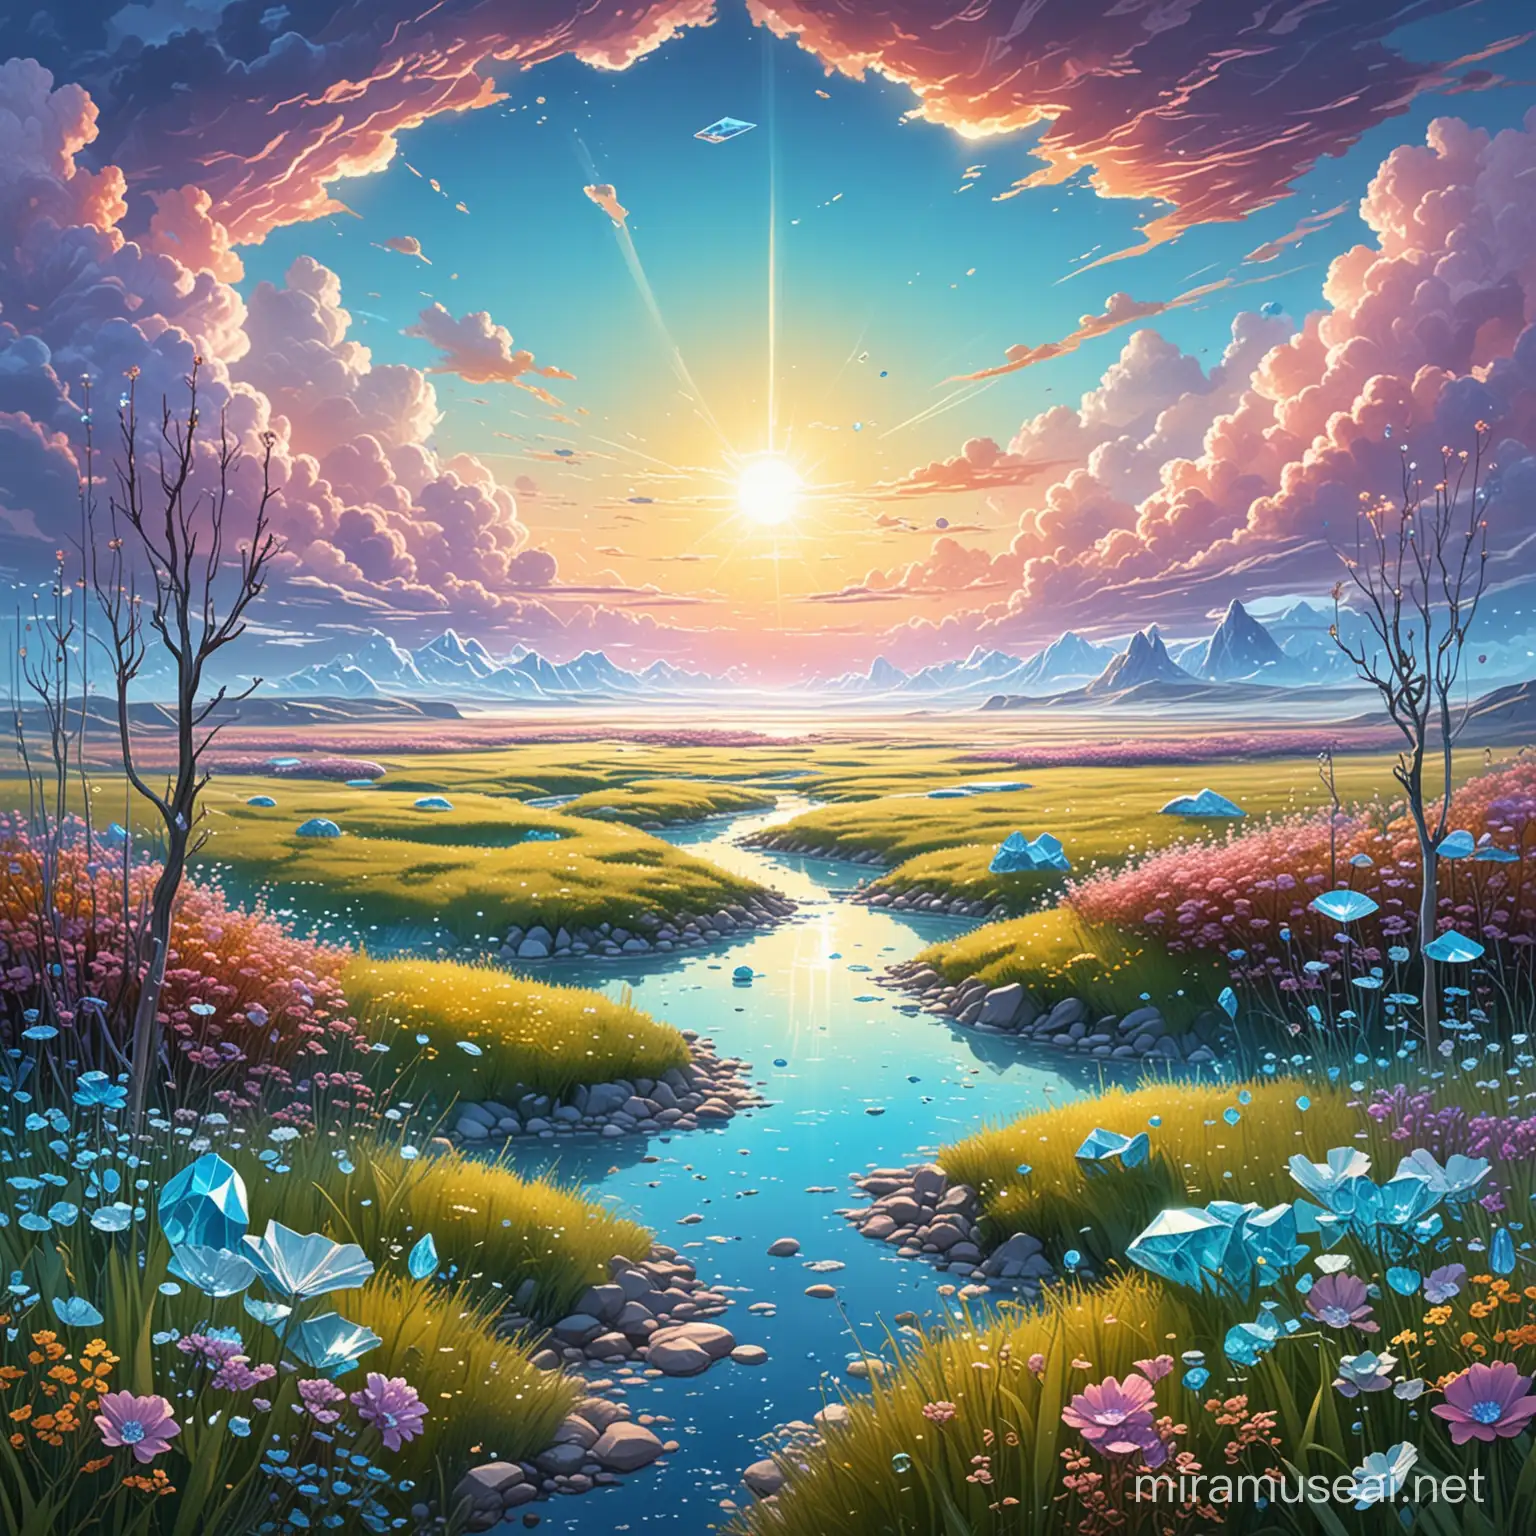 An illustration of a futuristic prairie in a world where trees and flowers and grass are made of diamonds, precious stones, crystals. Rivers contain freshwater instead of water, the sun is light blue in gradient. The clouds are made of colorful inkjet inks